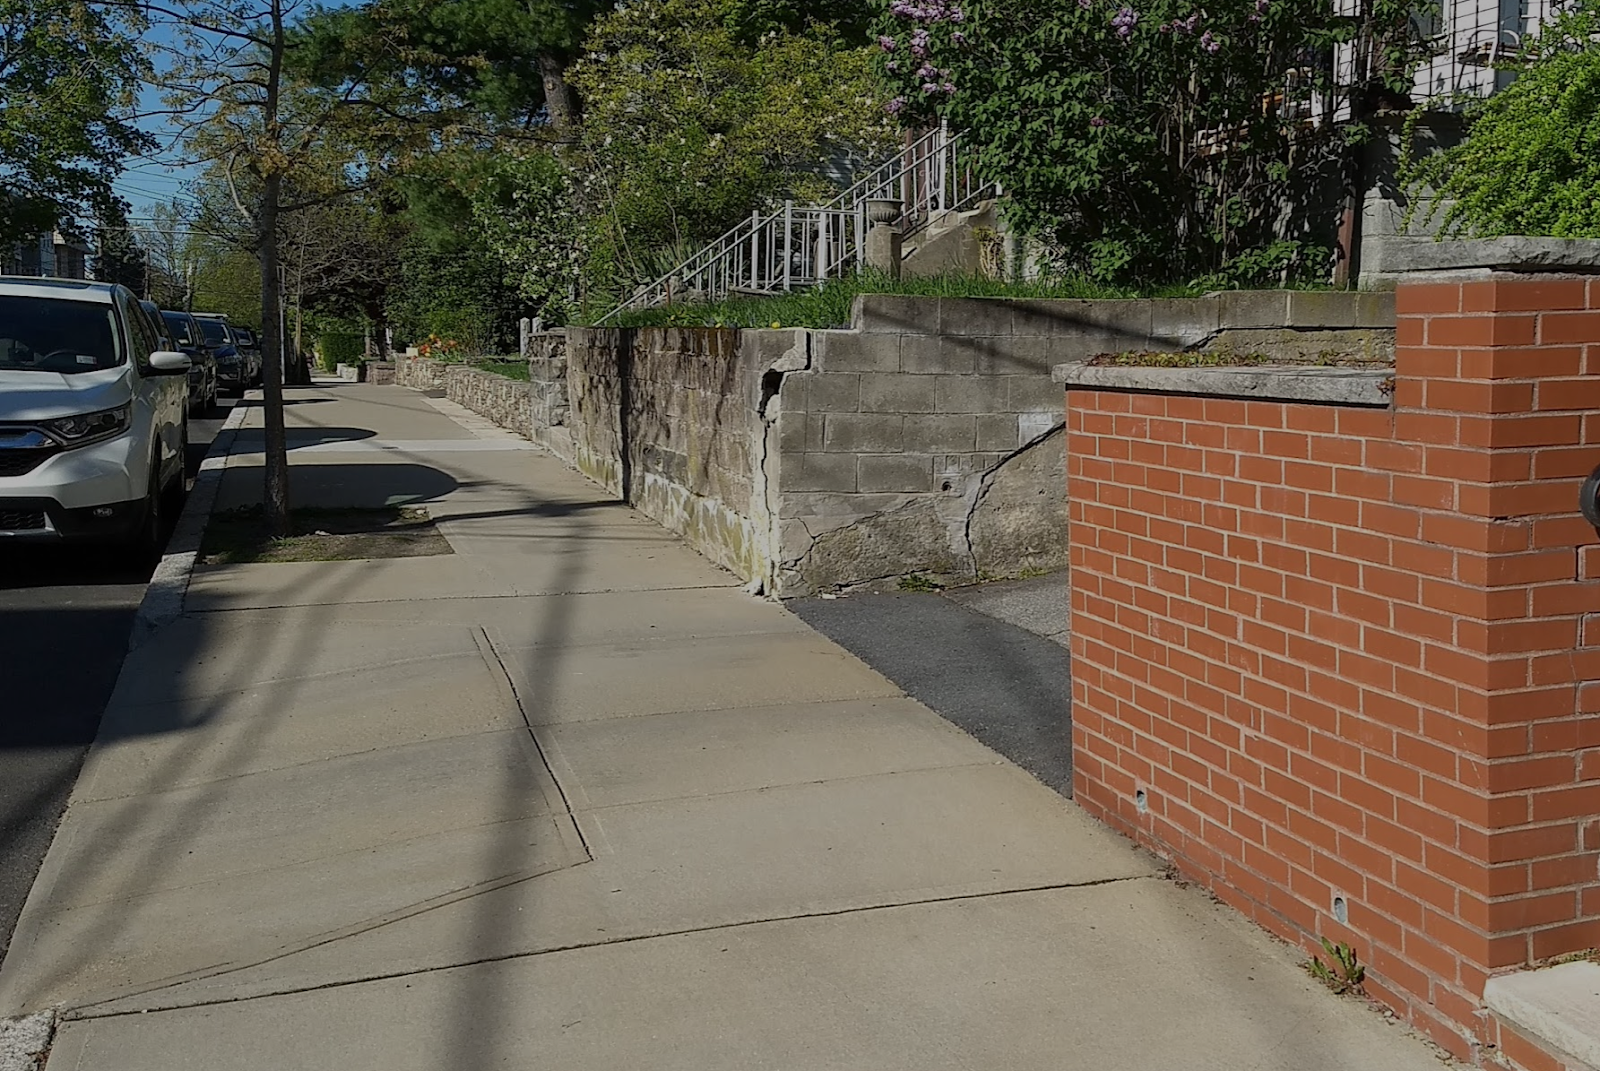 Blind driveway example with no way to see cars backing out due to a tall retaining wall constructed at a right angle and up to the sidewalk